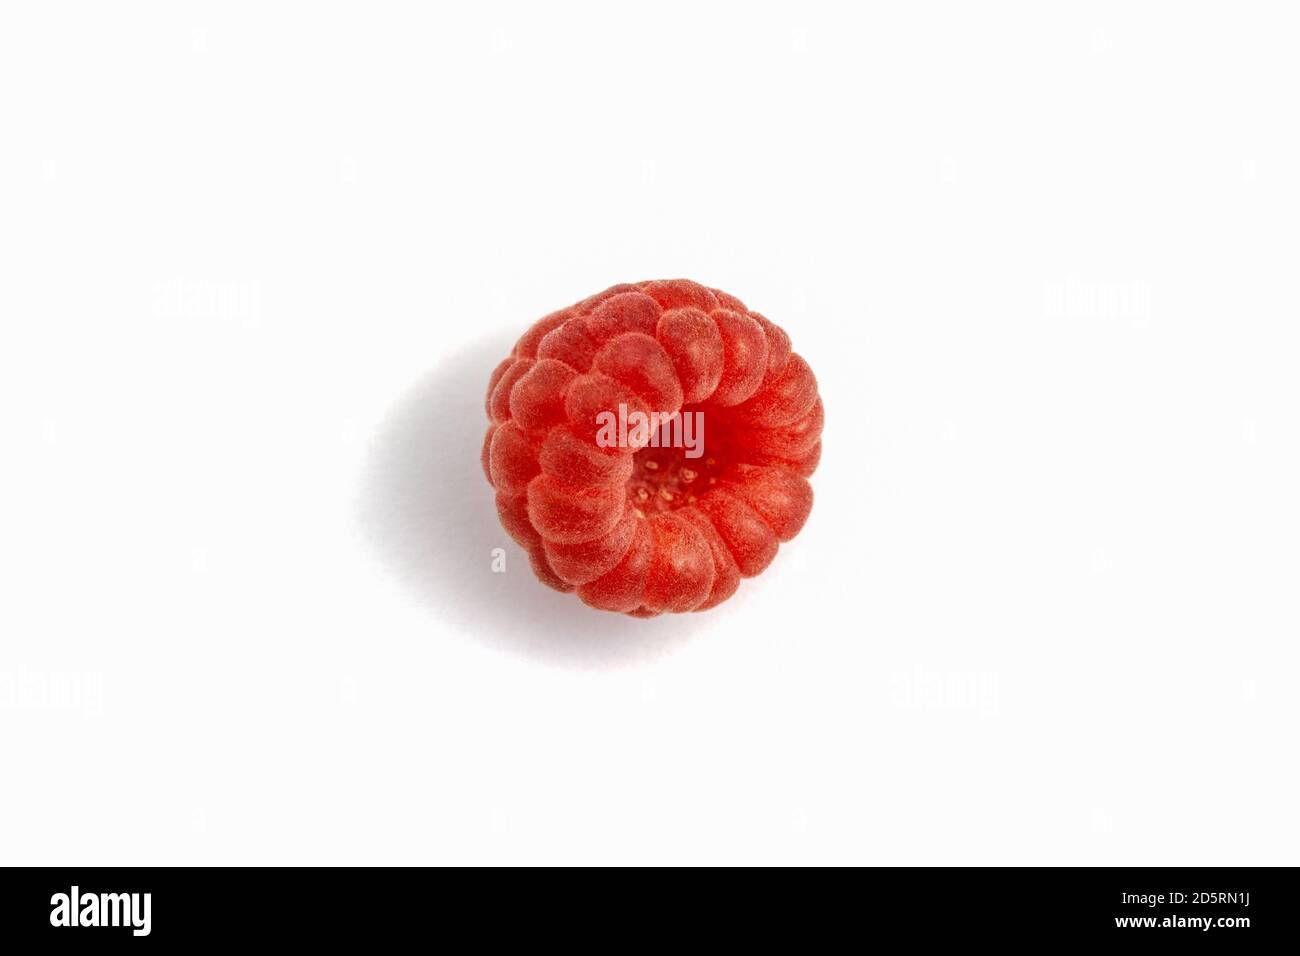 Ripe raspberry isolated on white background close-up. Fresh raspberries without sheets on the table. Macro shooting. Healthy, wholesome food. Top view Stock Photo